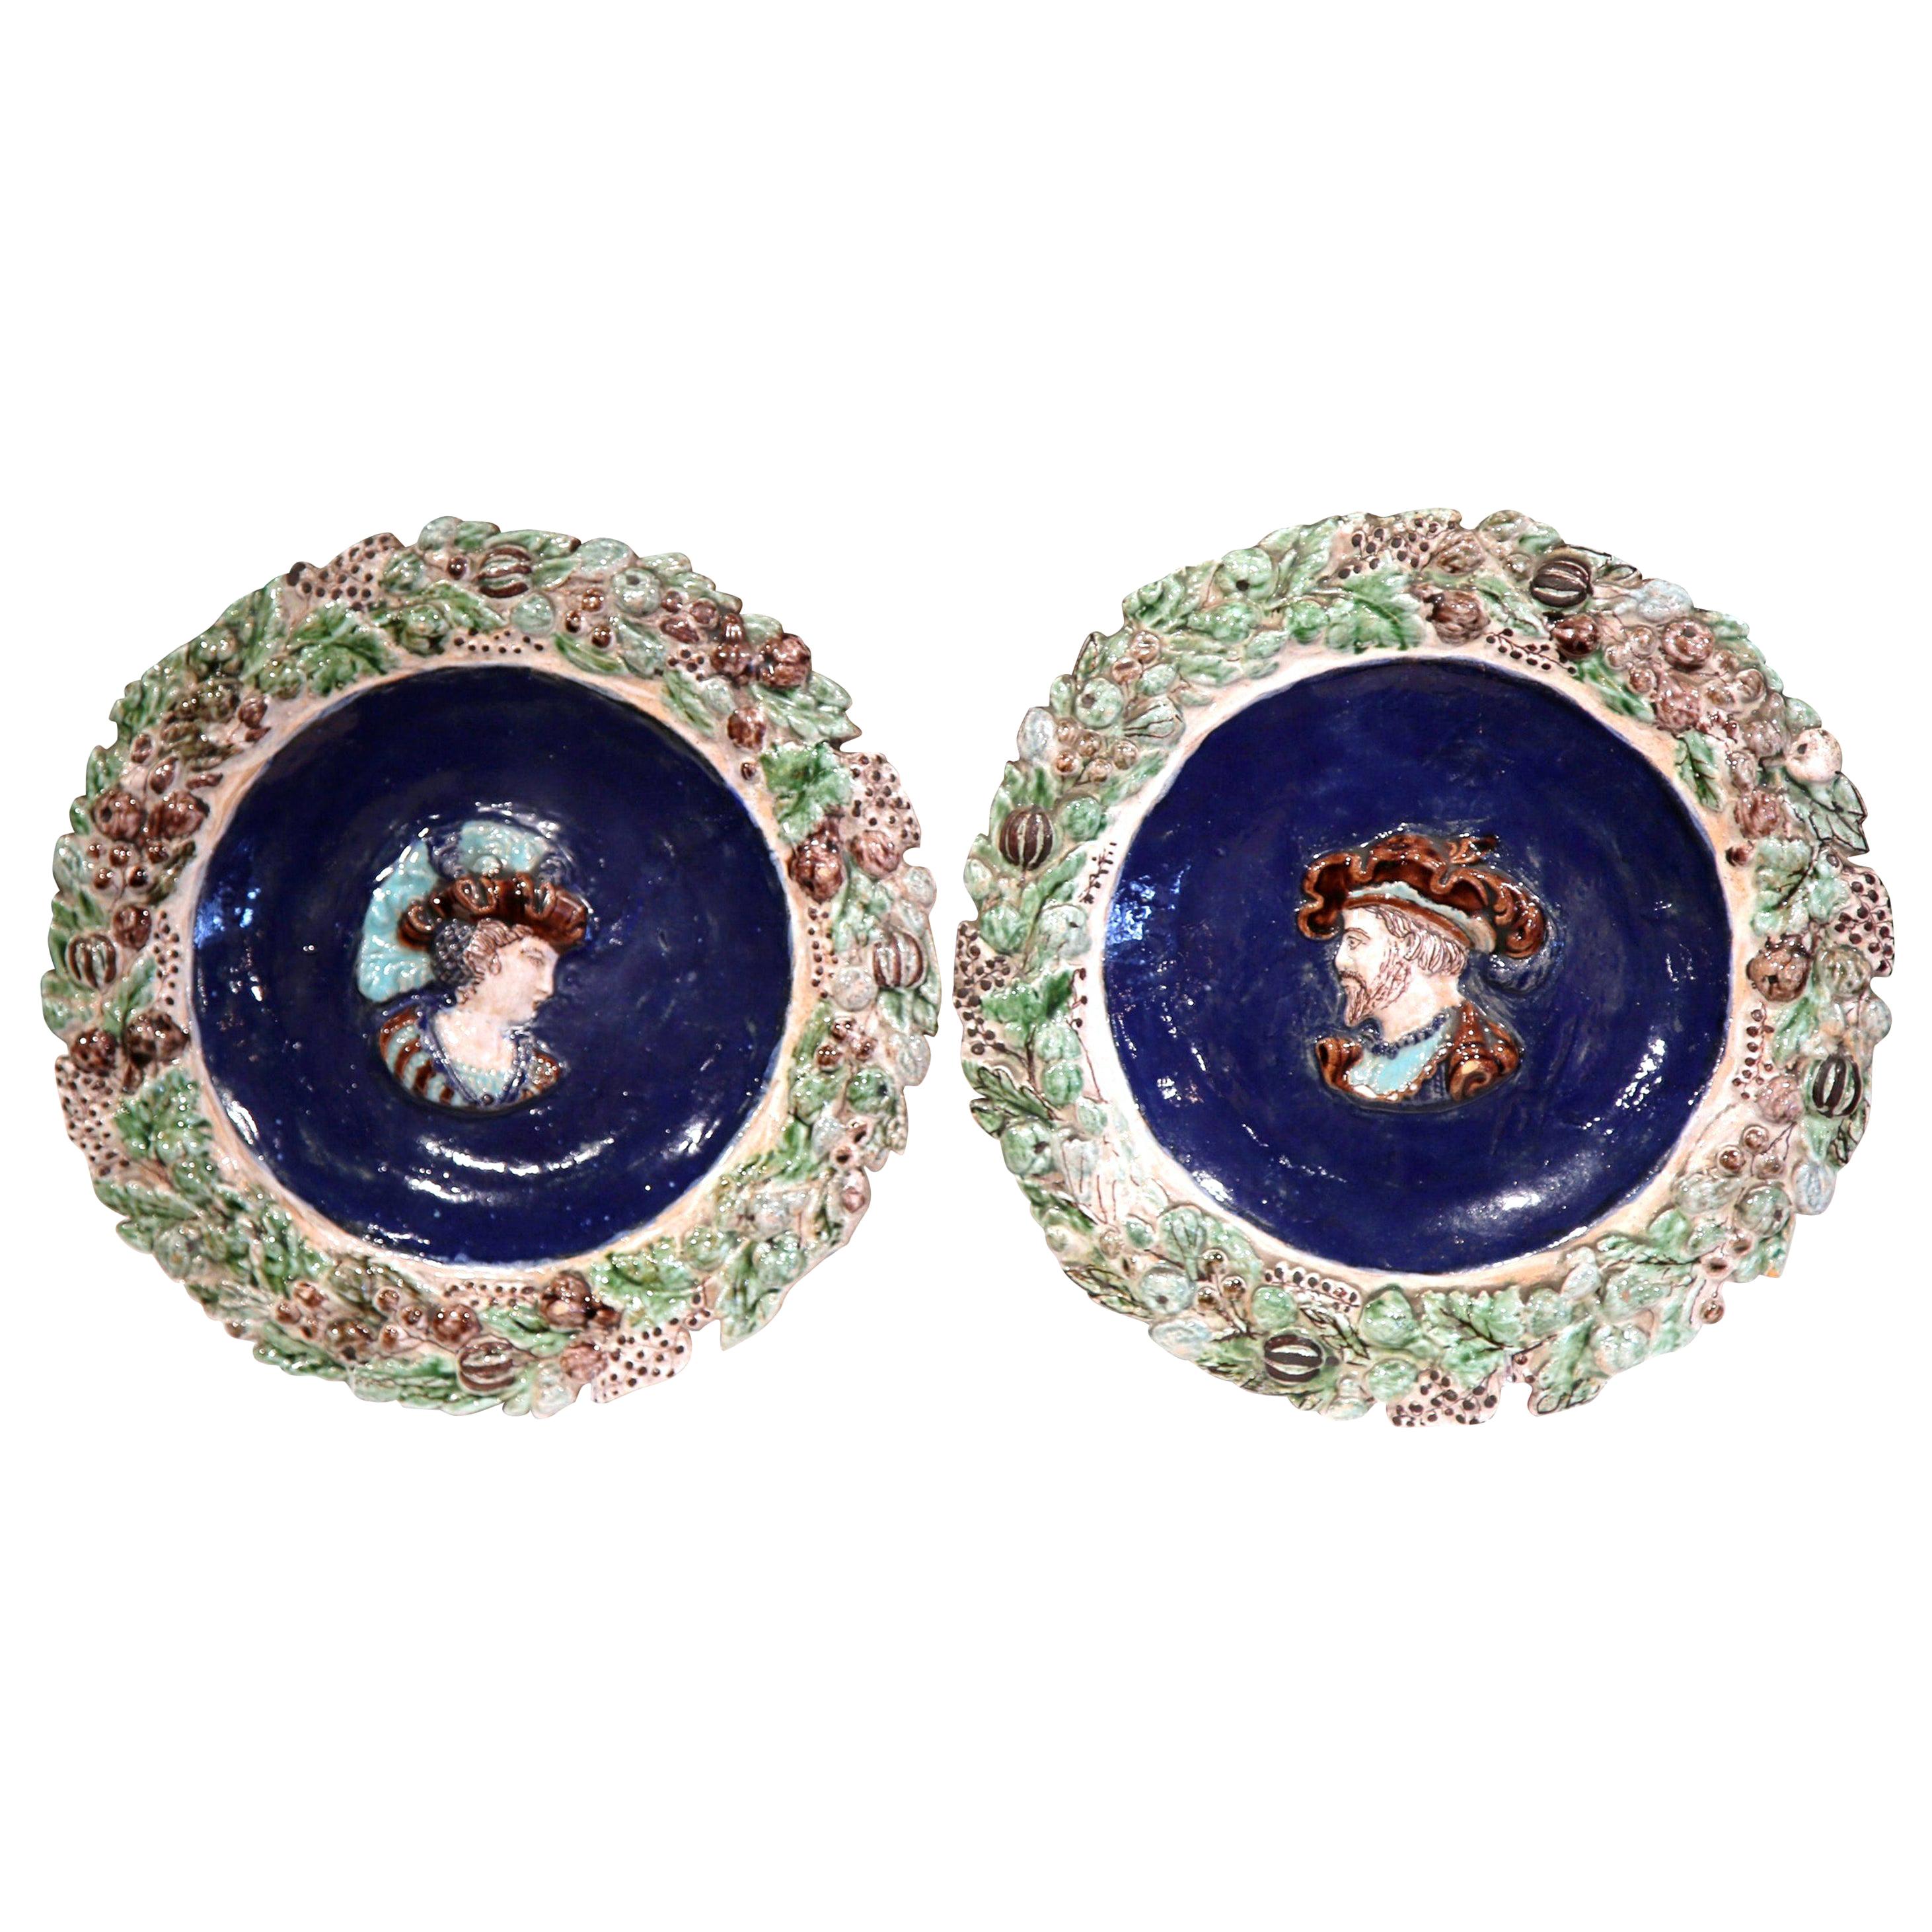 Pair of 19th Century French Barbotine Ceramic Chargers with King Francois I